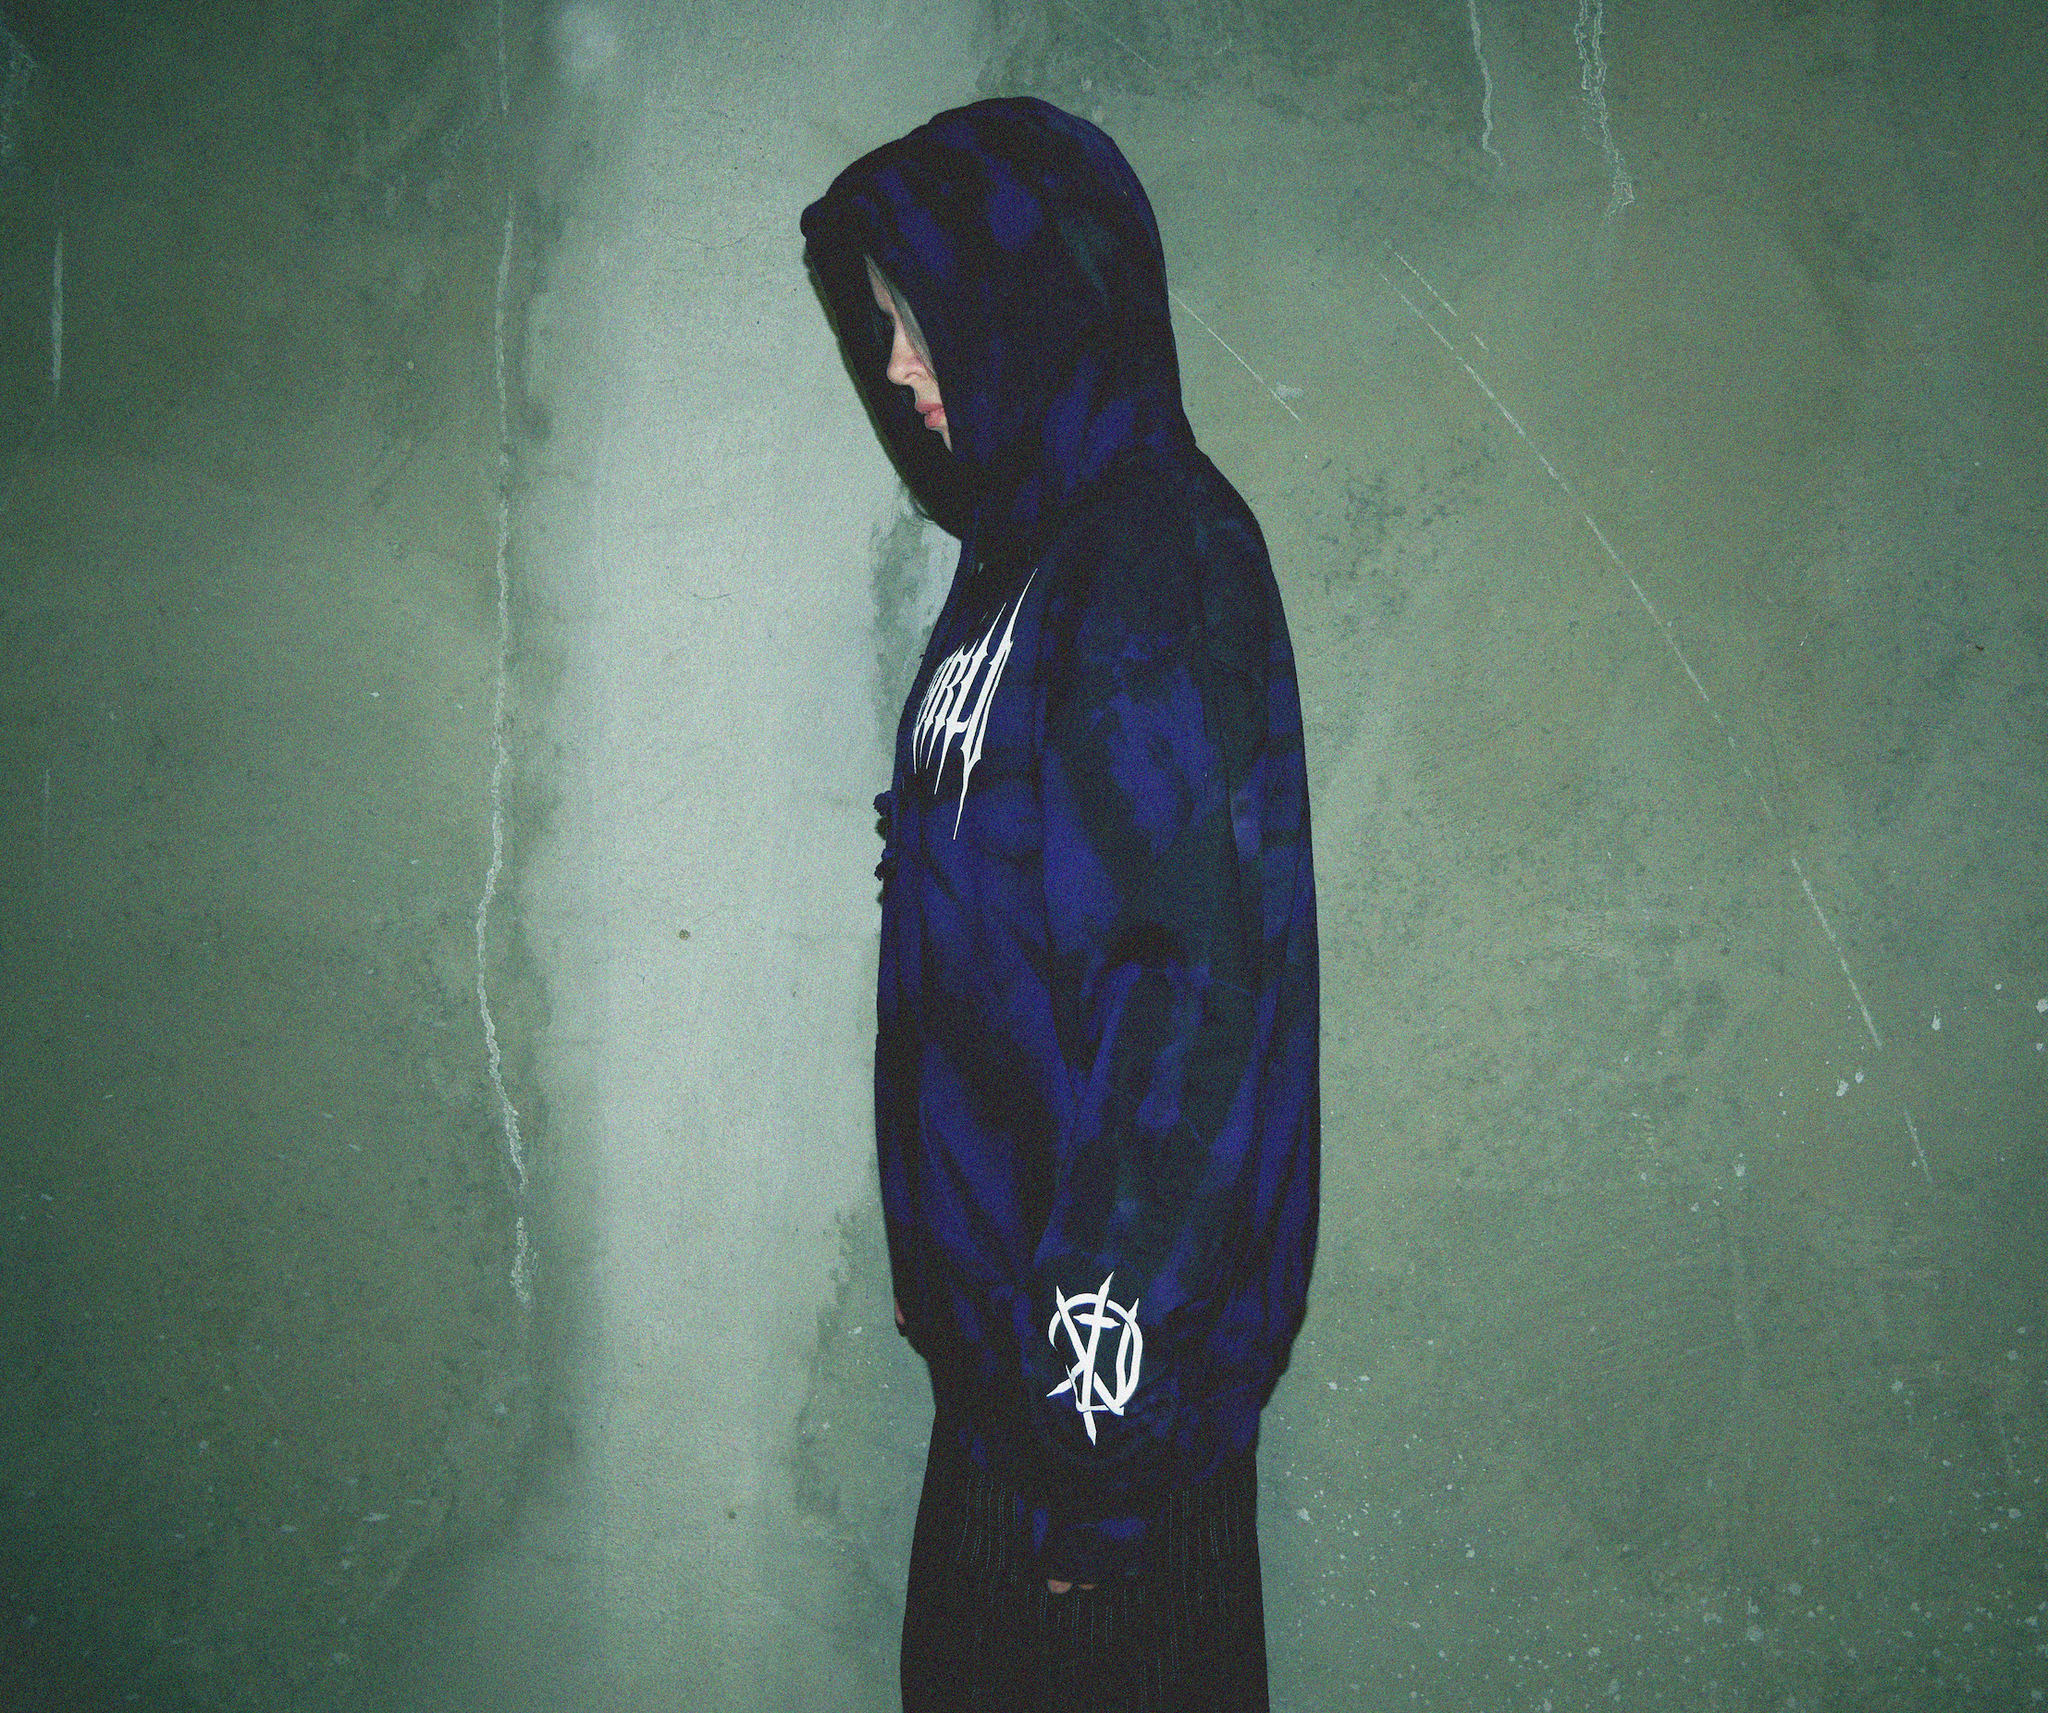 HOLLOW WORLD Dyed Hoodie